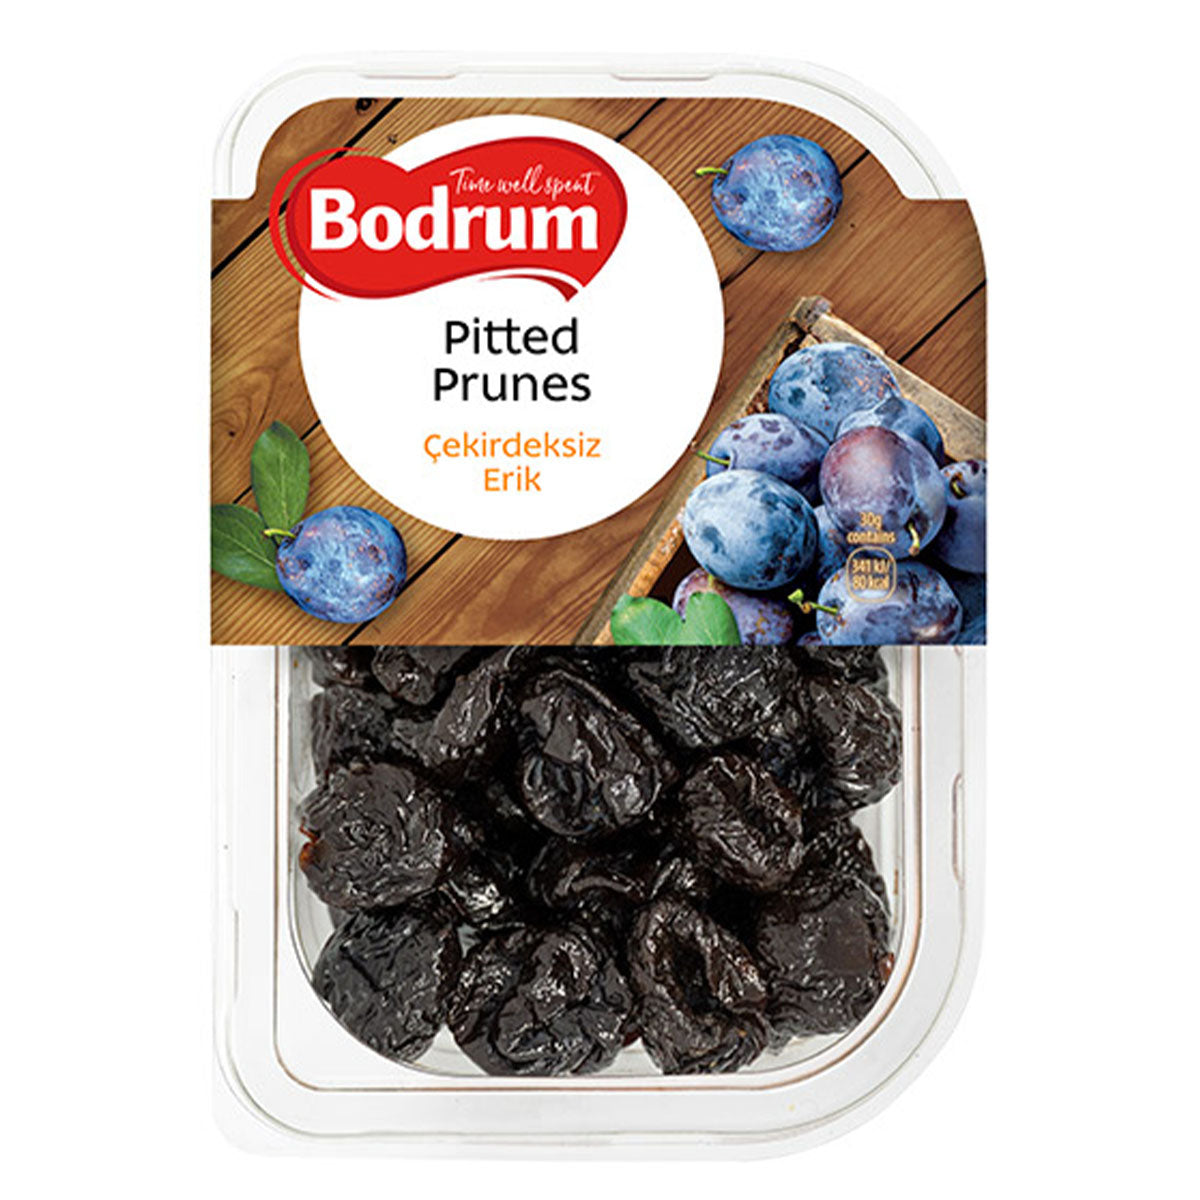 Bodrum - Pitted Prunes - 250g - Continental Food Store